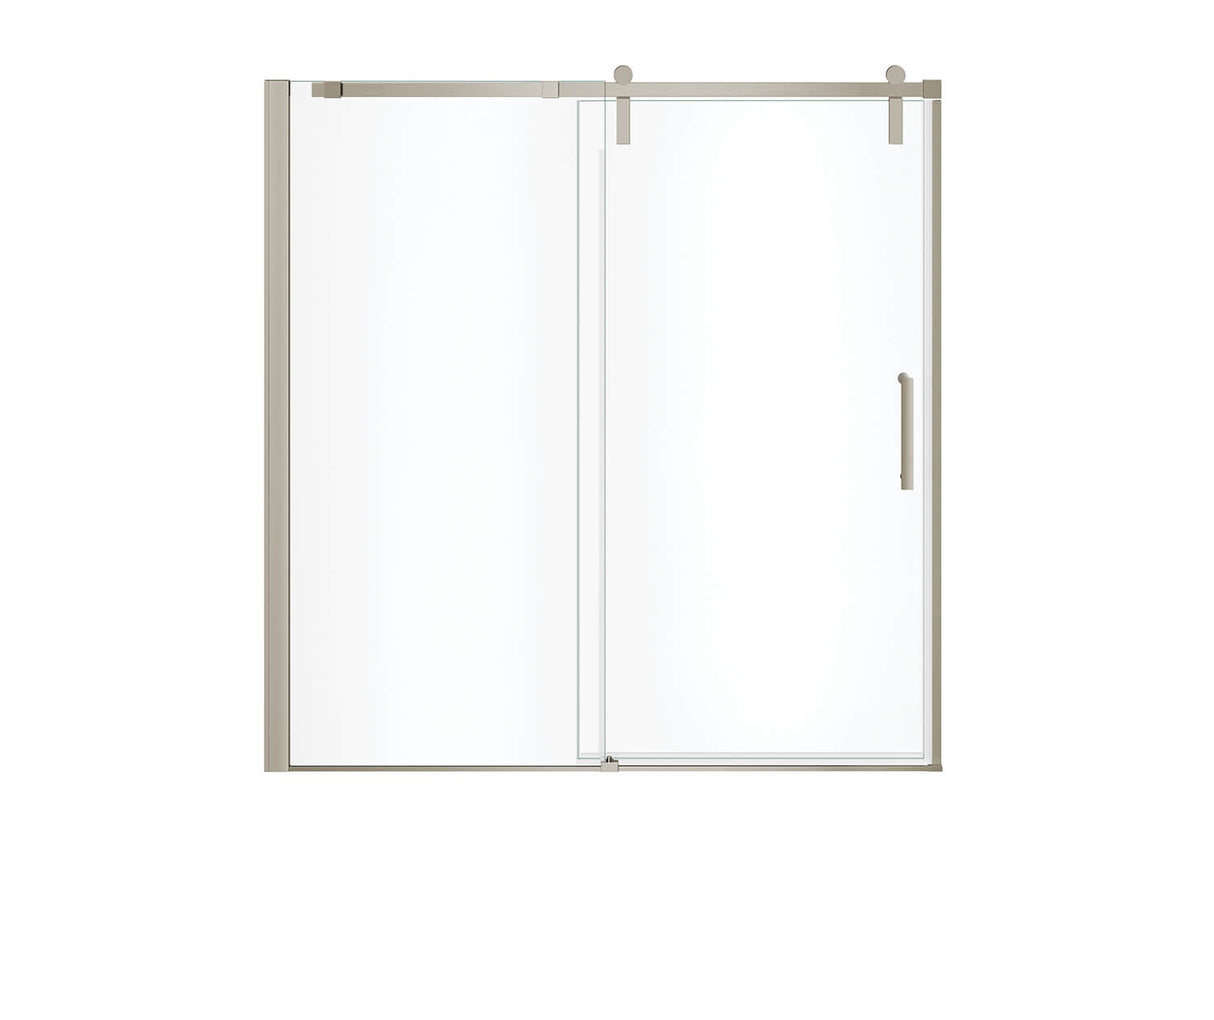 MAAX 137682-900-305-000 Outback 55 ¼ - 58 1/2 x 57 in. 8mm Sliding Tub Door for Alcove Installation with Clear glass in Brushed Nickel